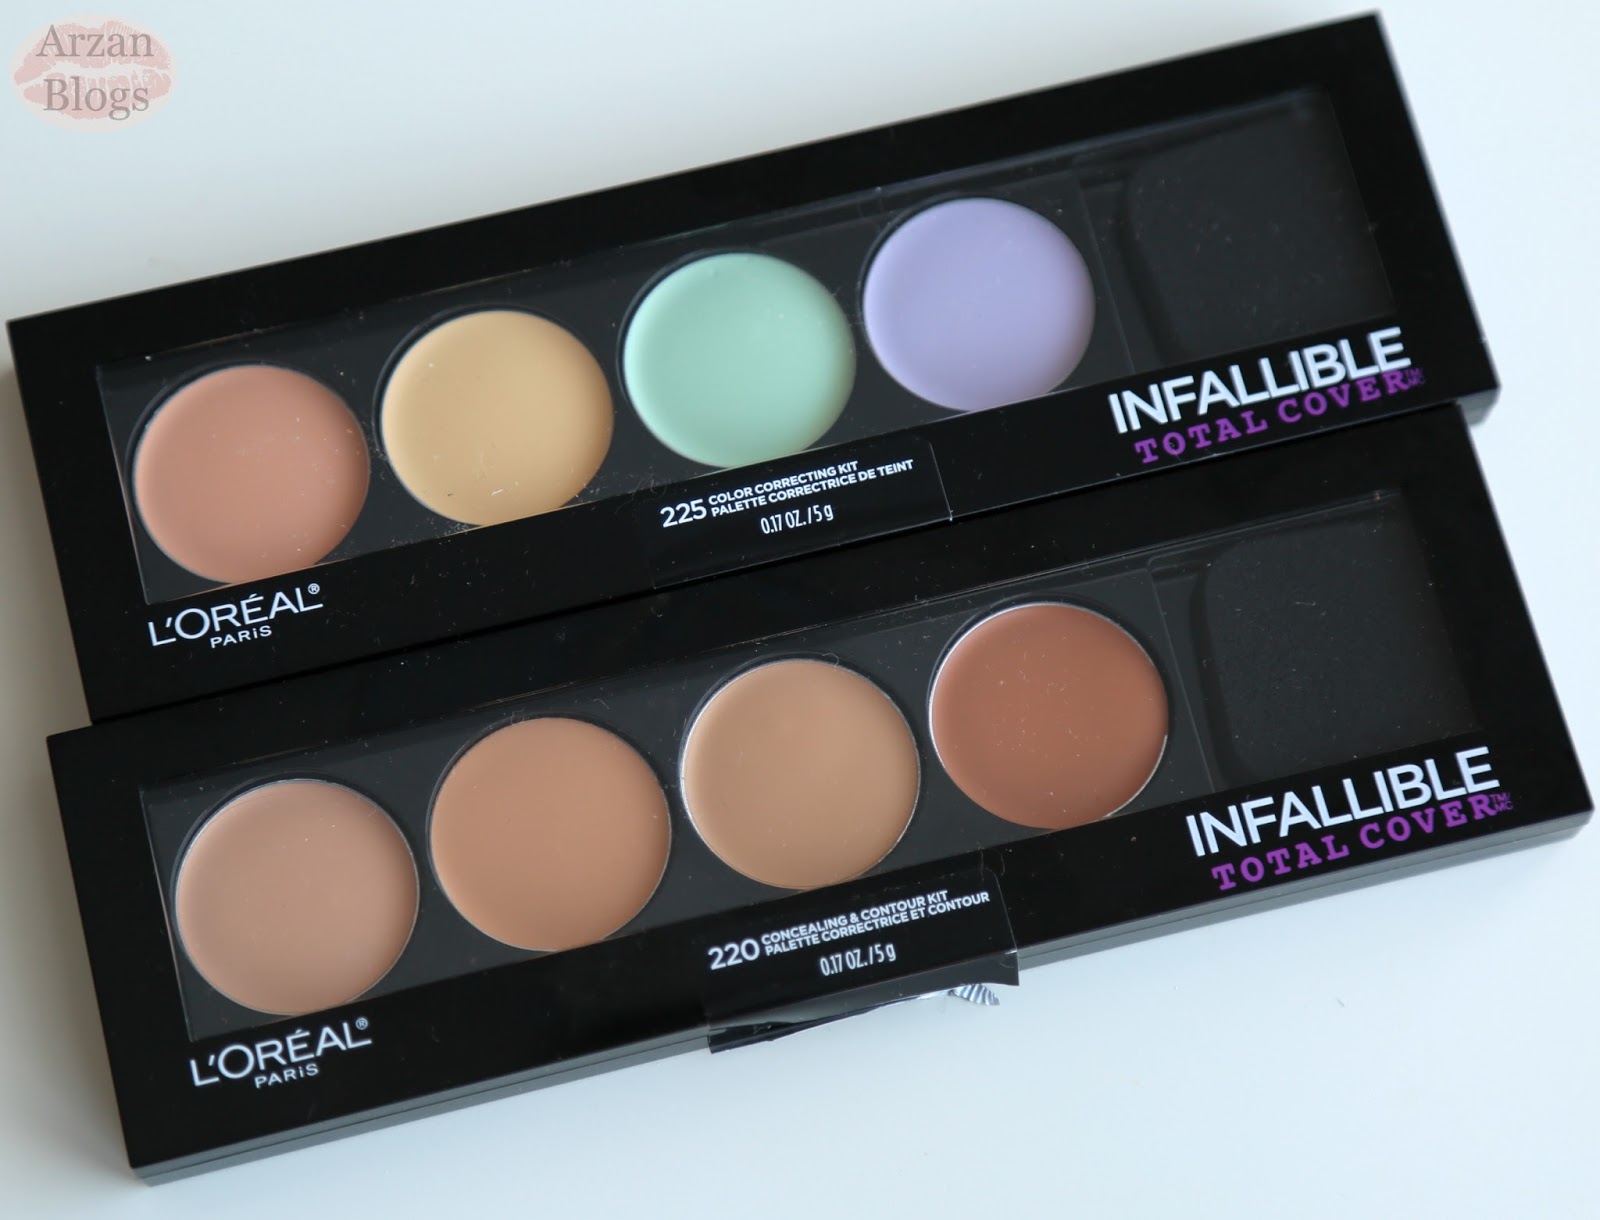 ARZAN BLOGS: L'Oreal Infallible Total Color Correcting Kits